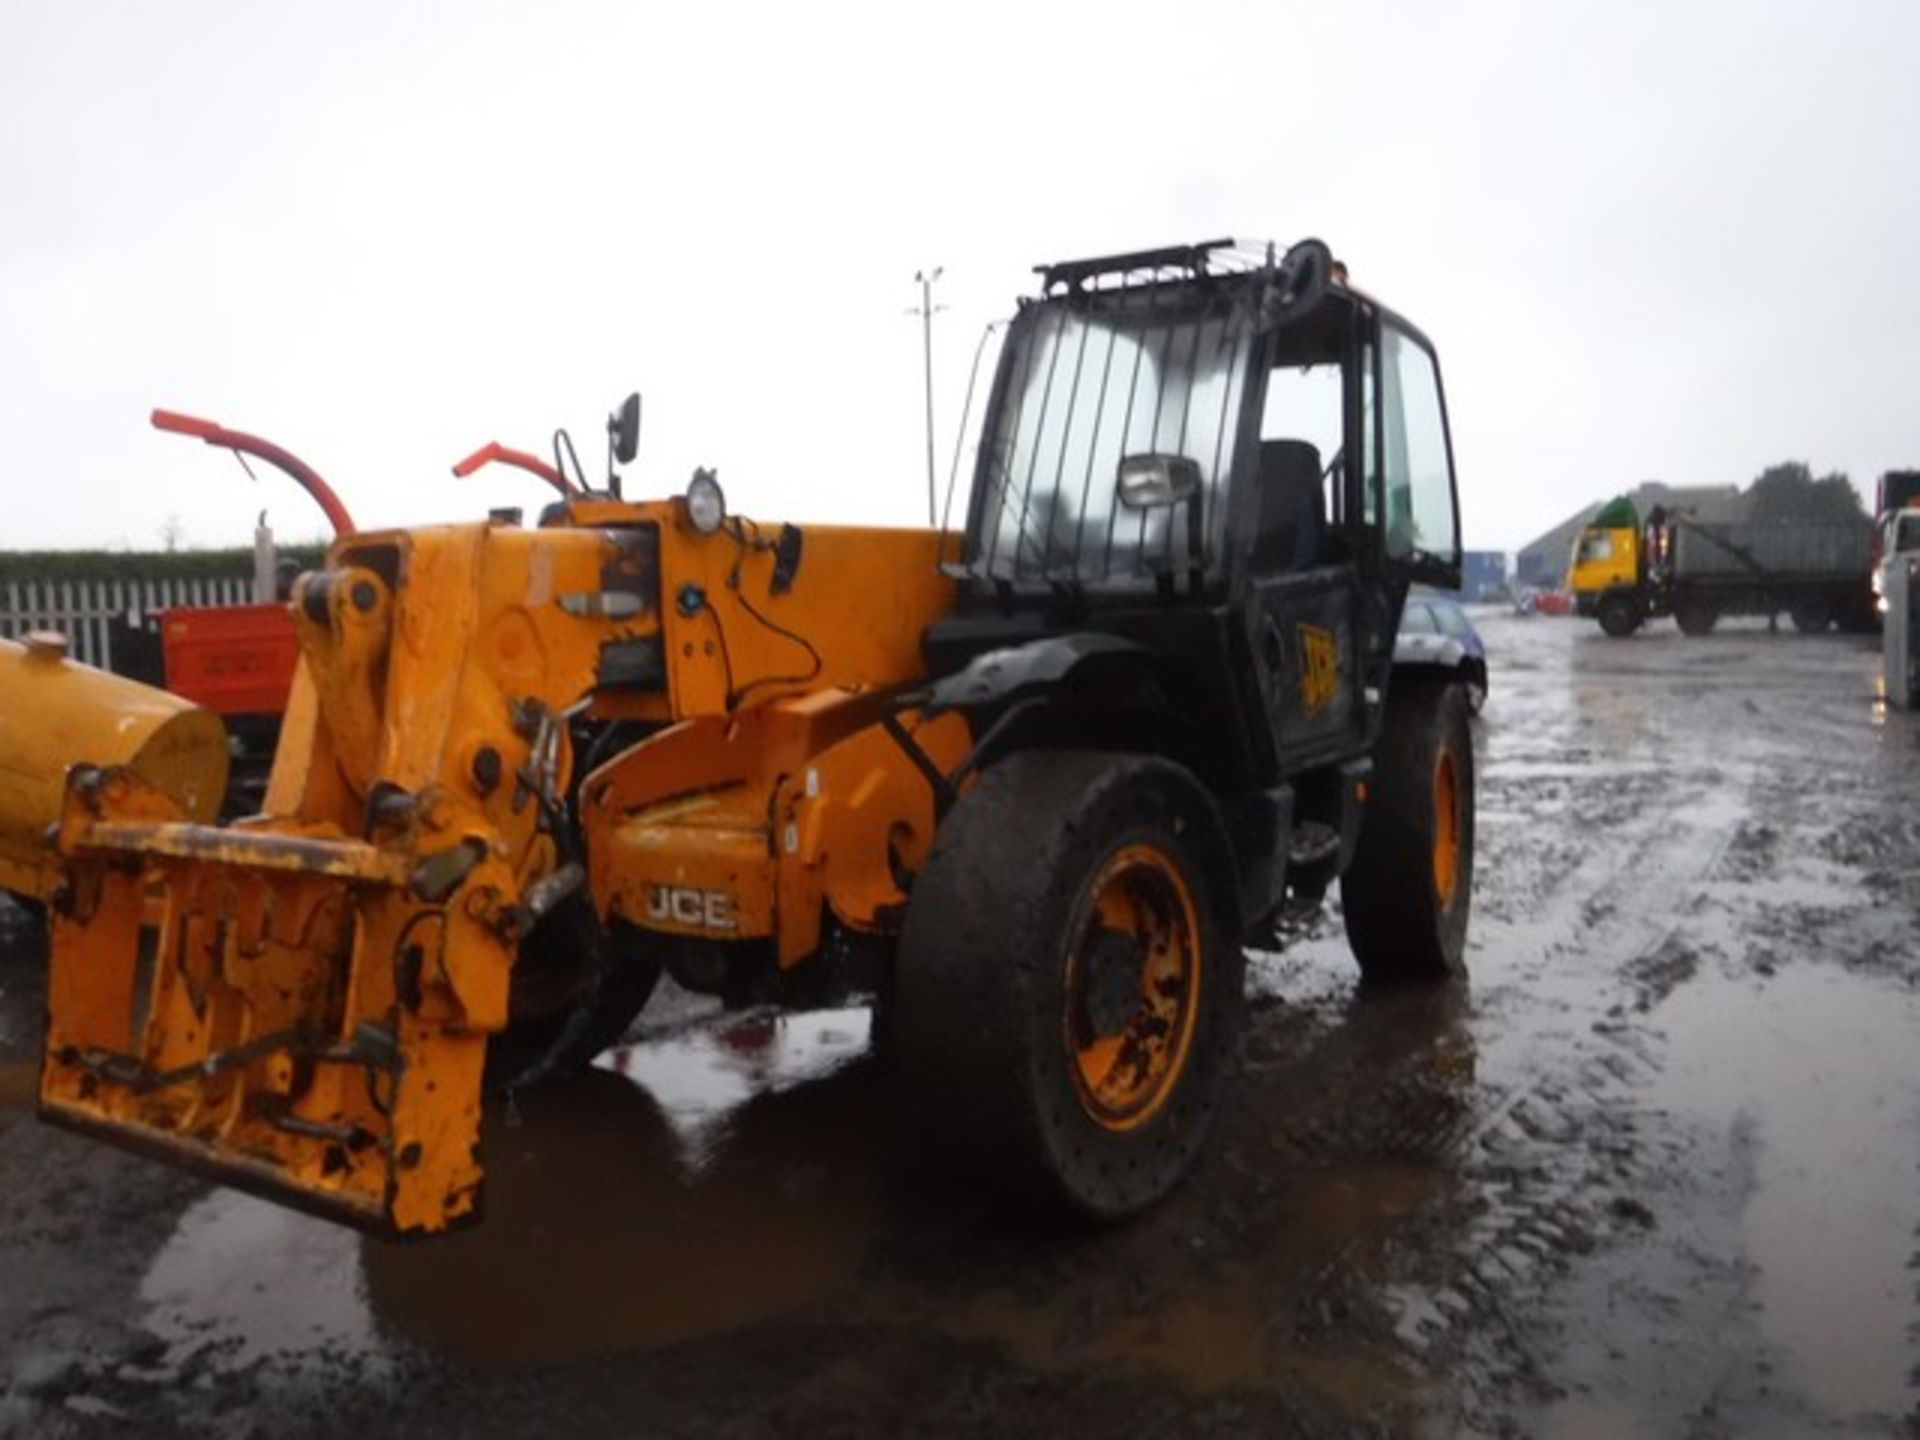 2012 JCB 550 - 80 WASTE SPECIAL TELESCOPIC HANDLER, 8870hrs (NOT VERIFIED) ON SOLID TYRES - Image 2 of 13